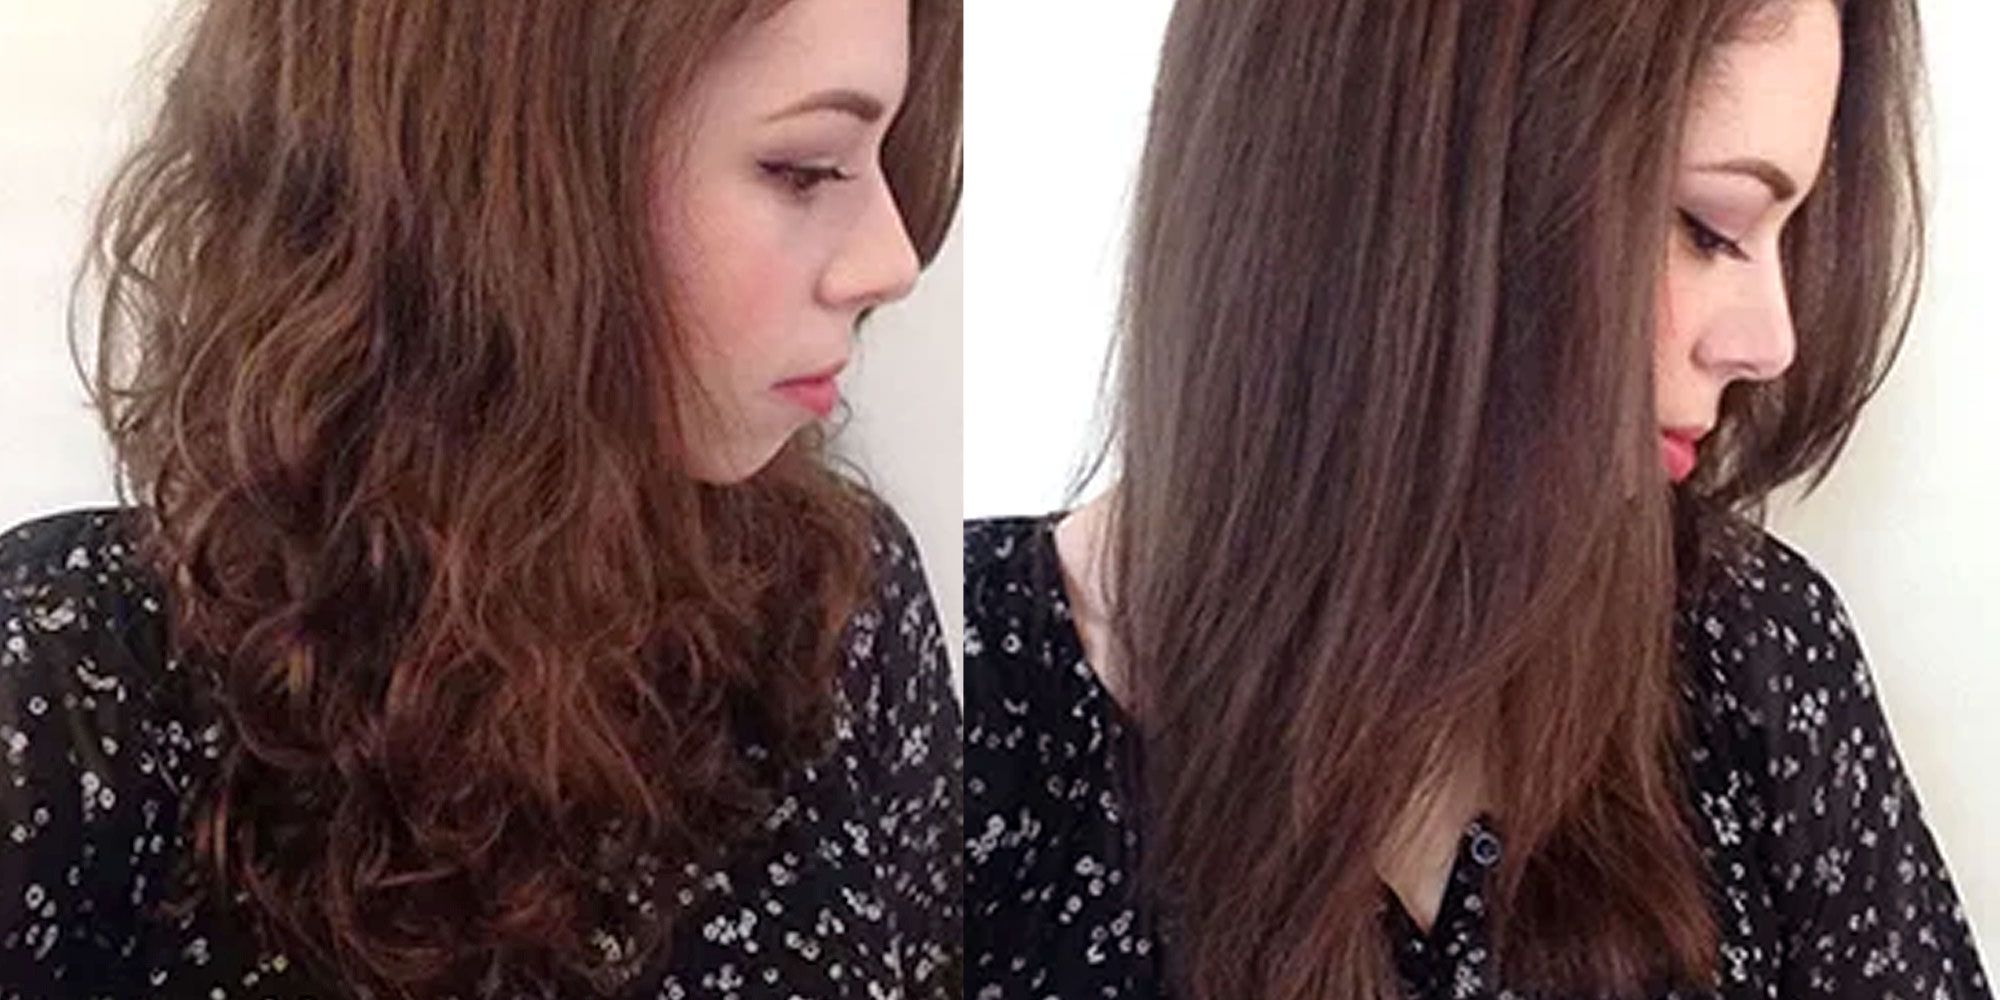 Best budget-friendly hair straighteners for curly hair